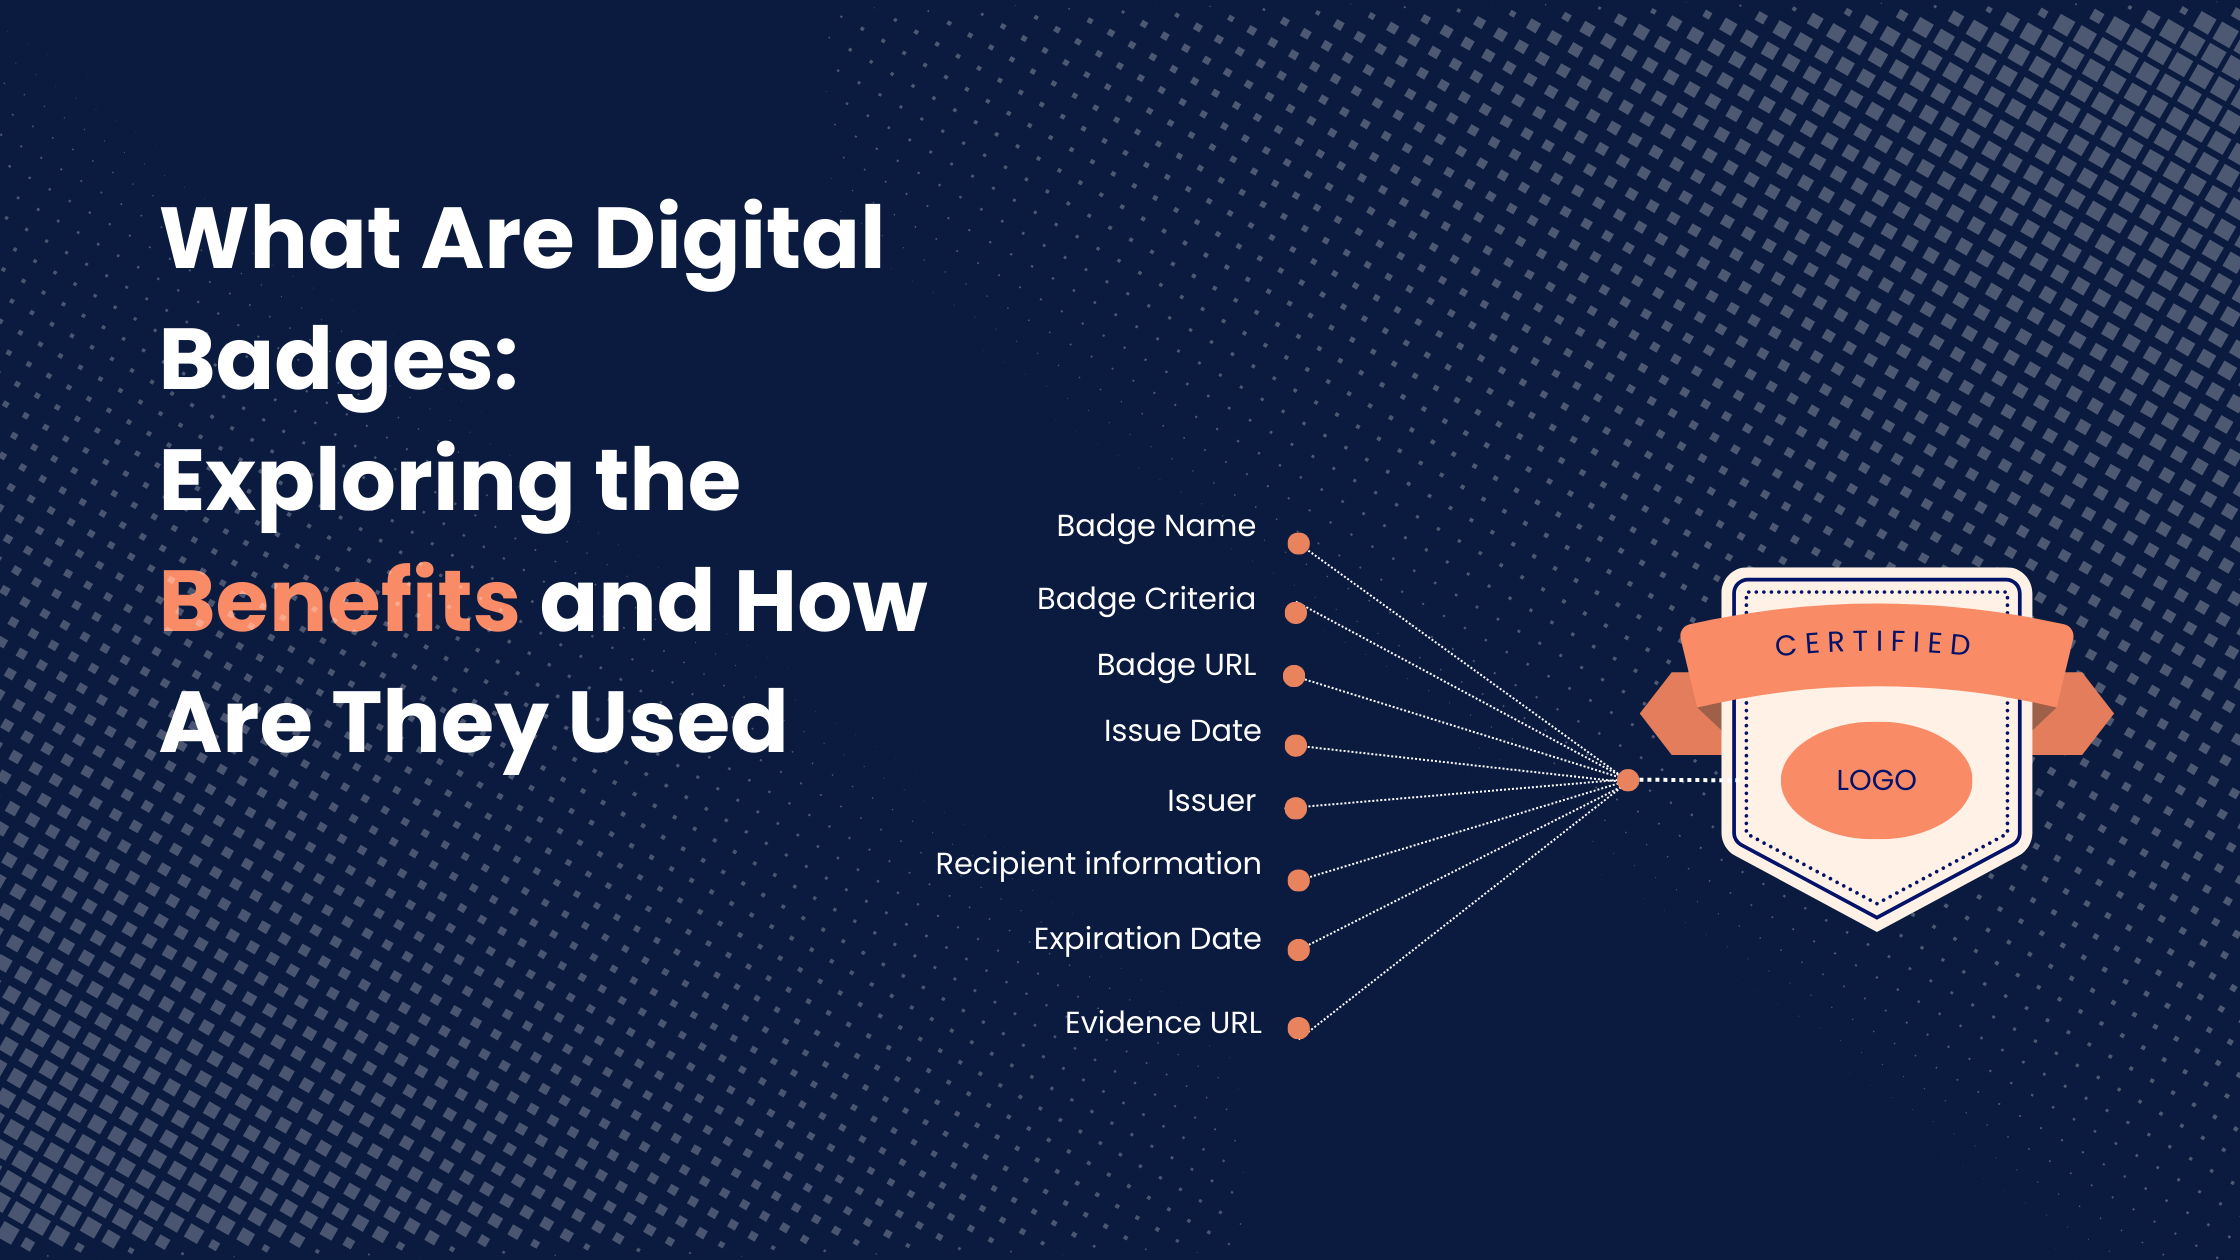 What Are Digital Badges? Exploring the Benefits and How Are They Used